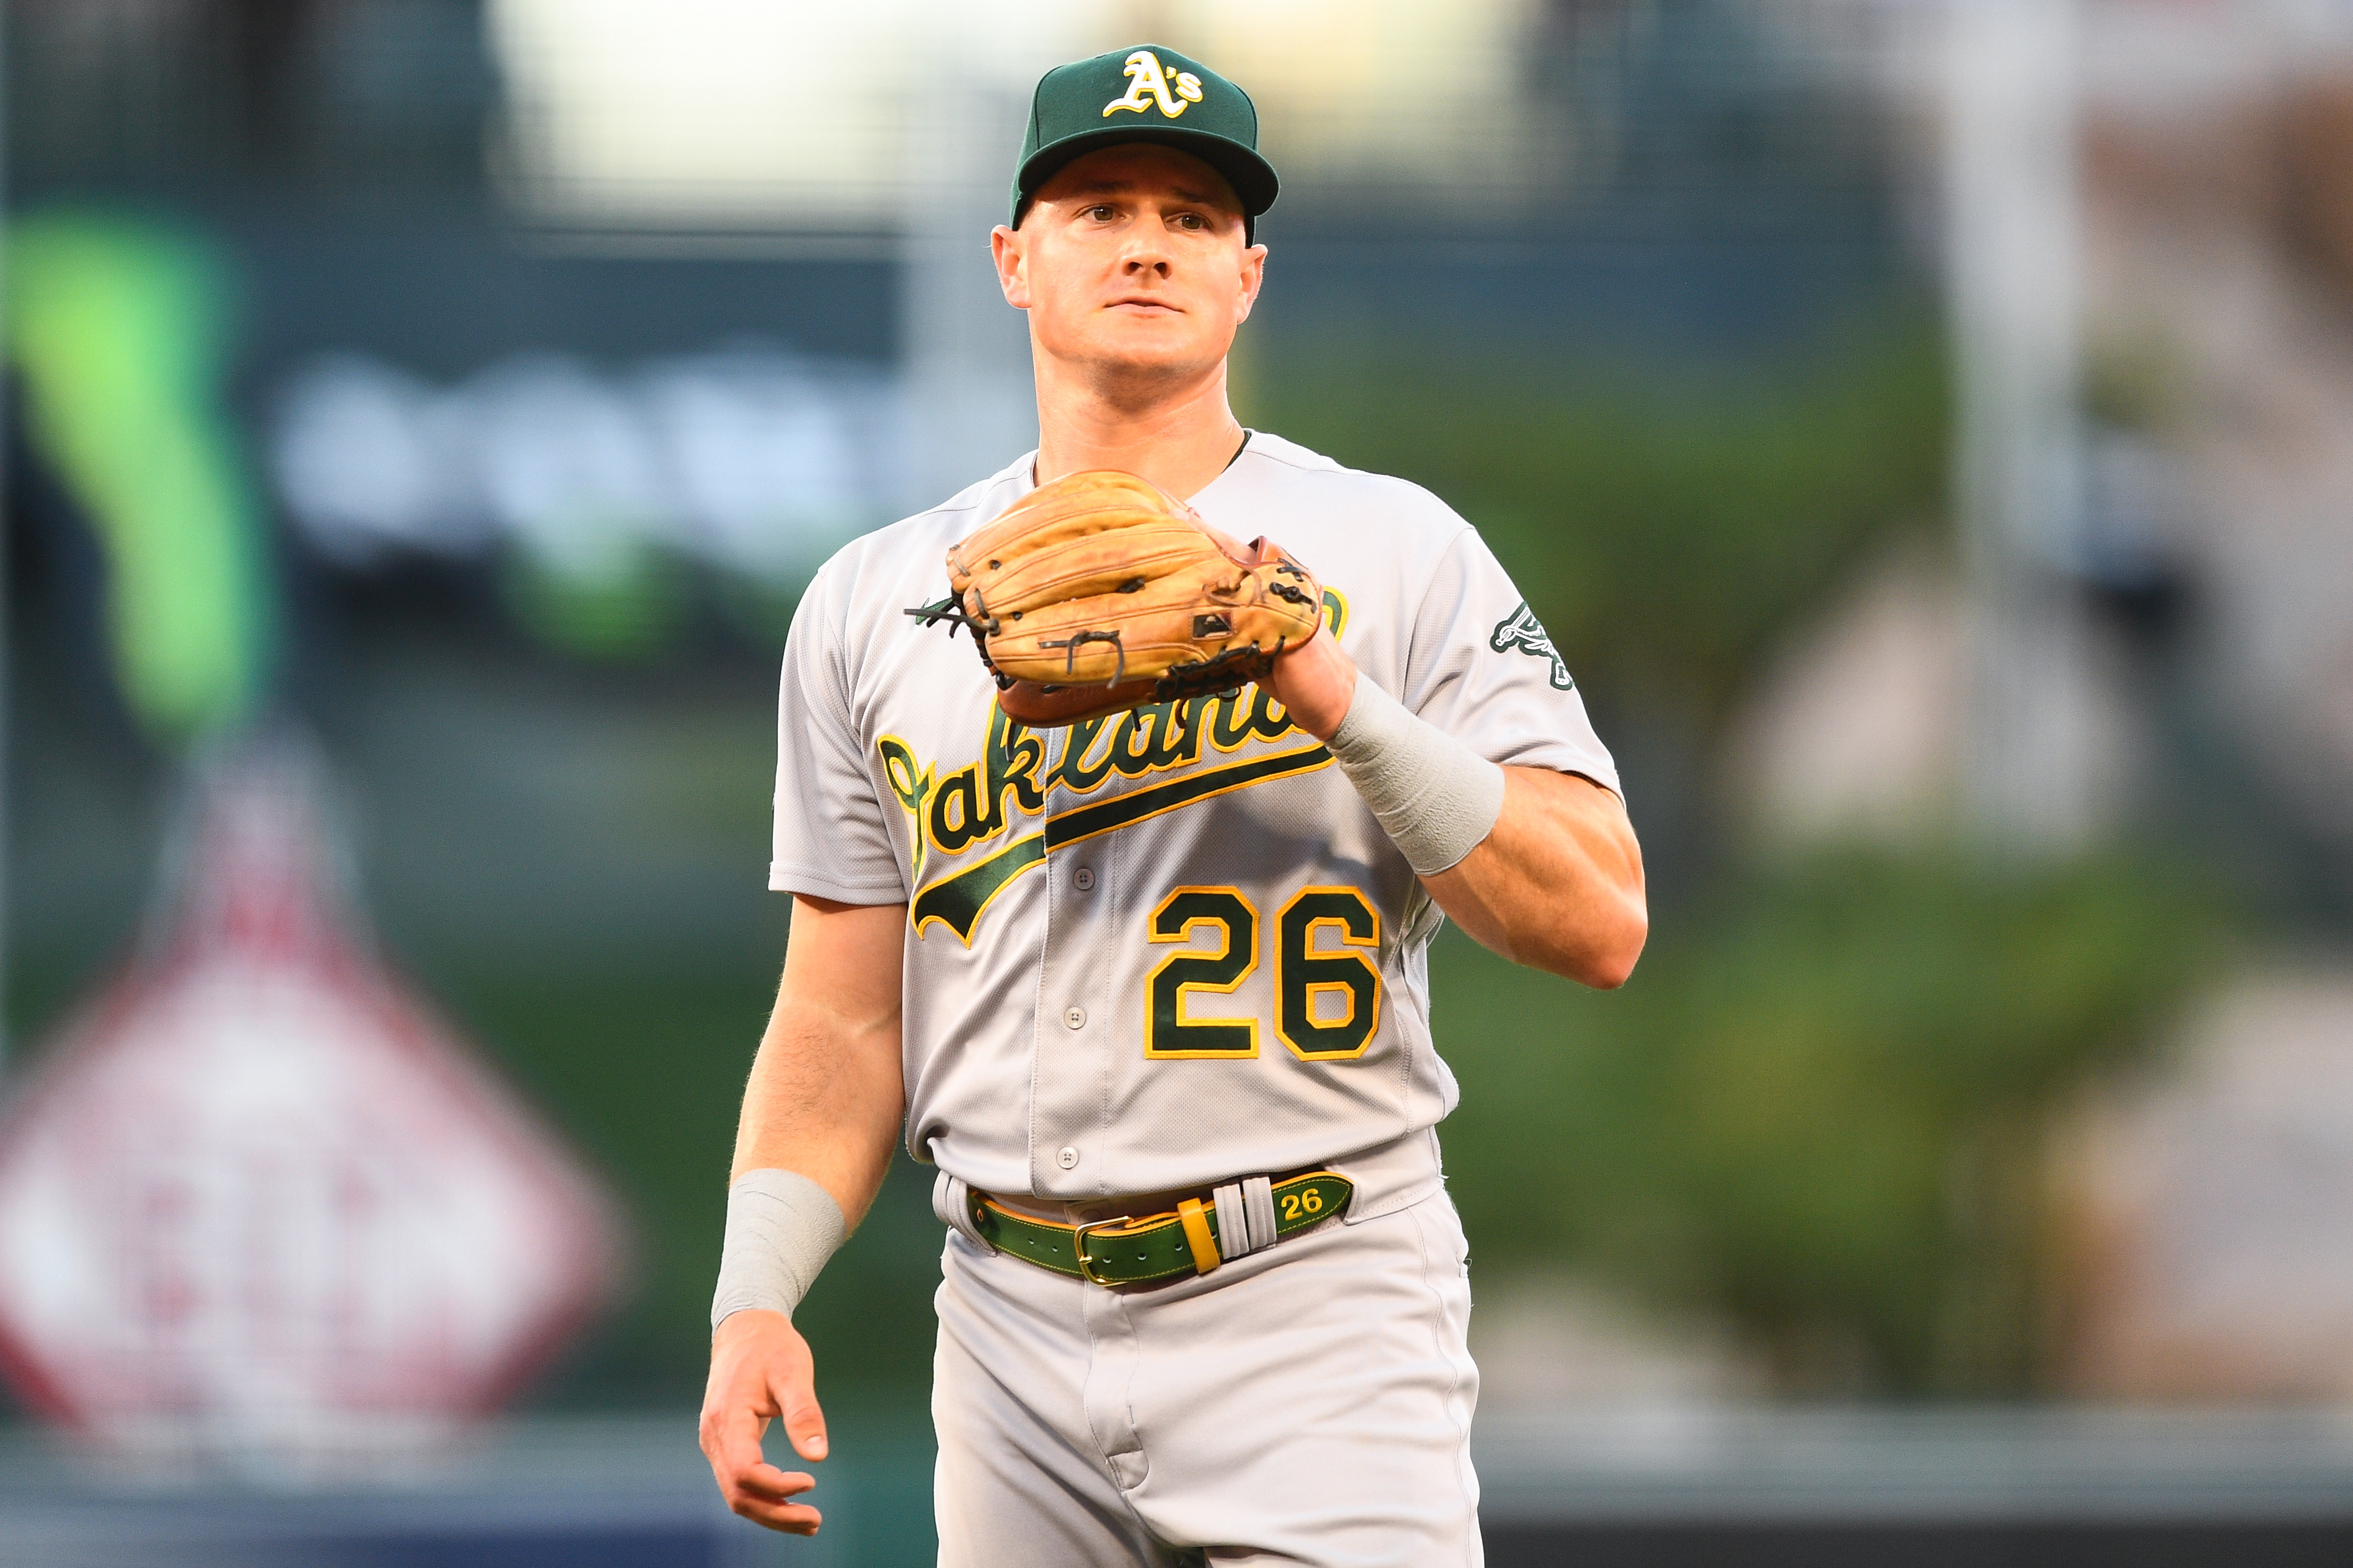 Why Matt Chapman received his Gold Glove in Toronto with A's present